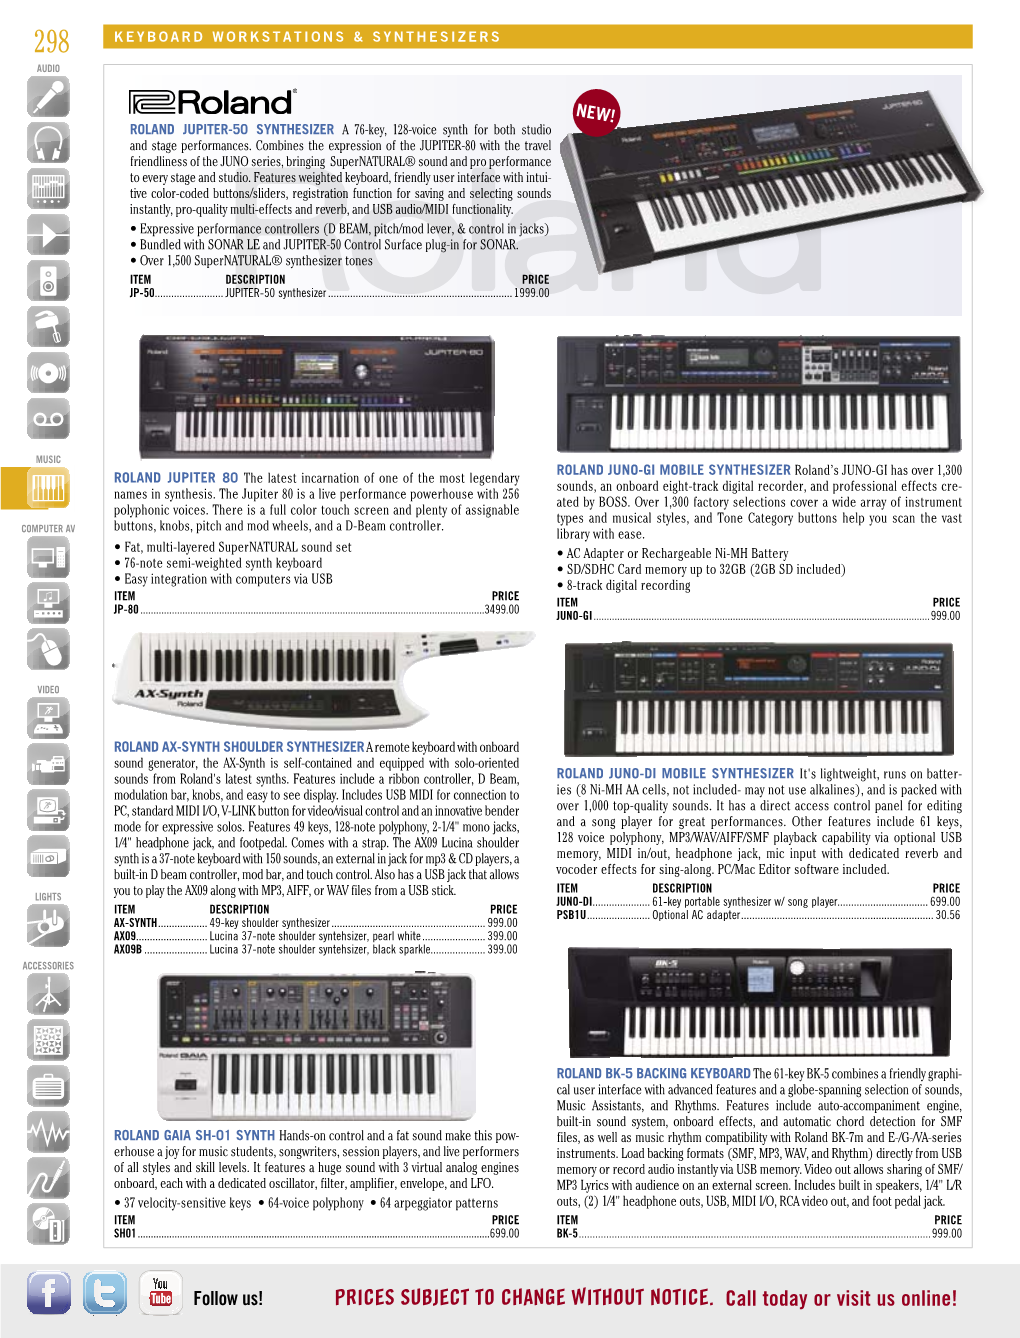 Prices Subject to Change Without Notice. Call Today Or Visit Us Online! Keyboard Workstations & Synthesizers 299